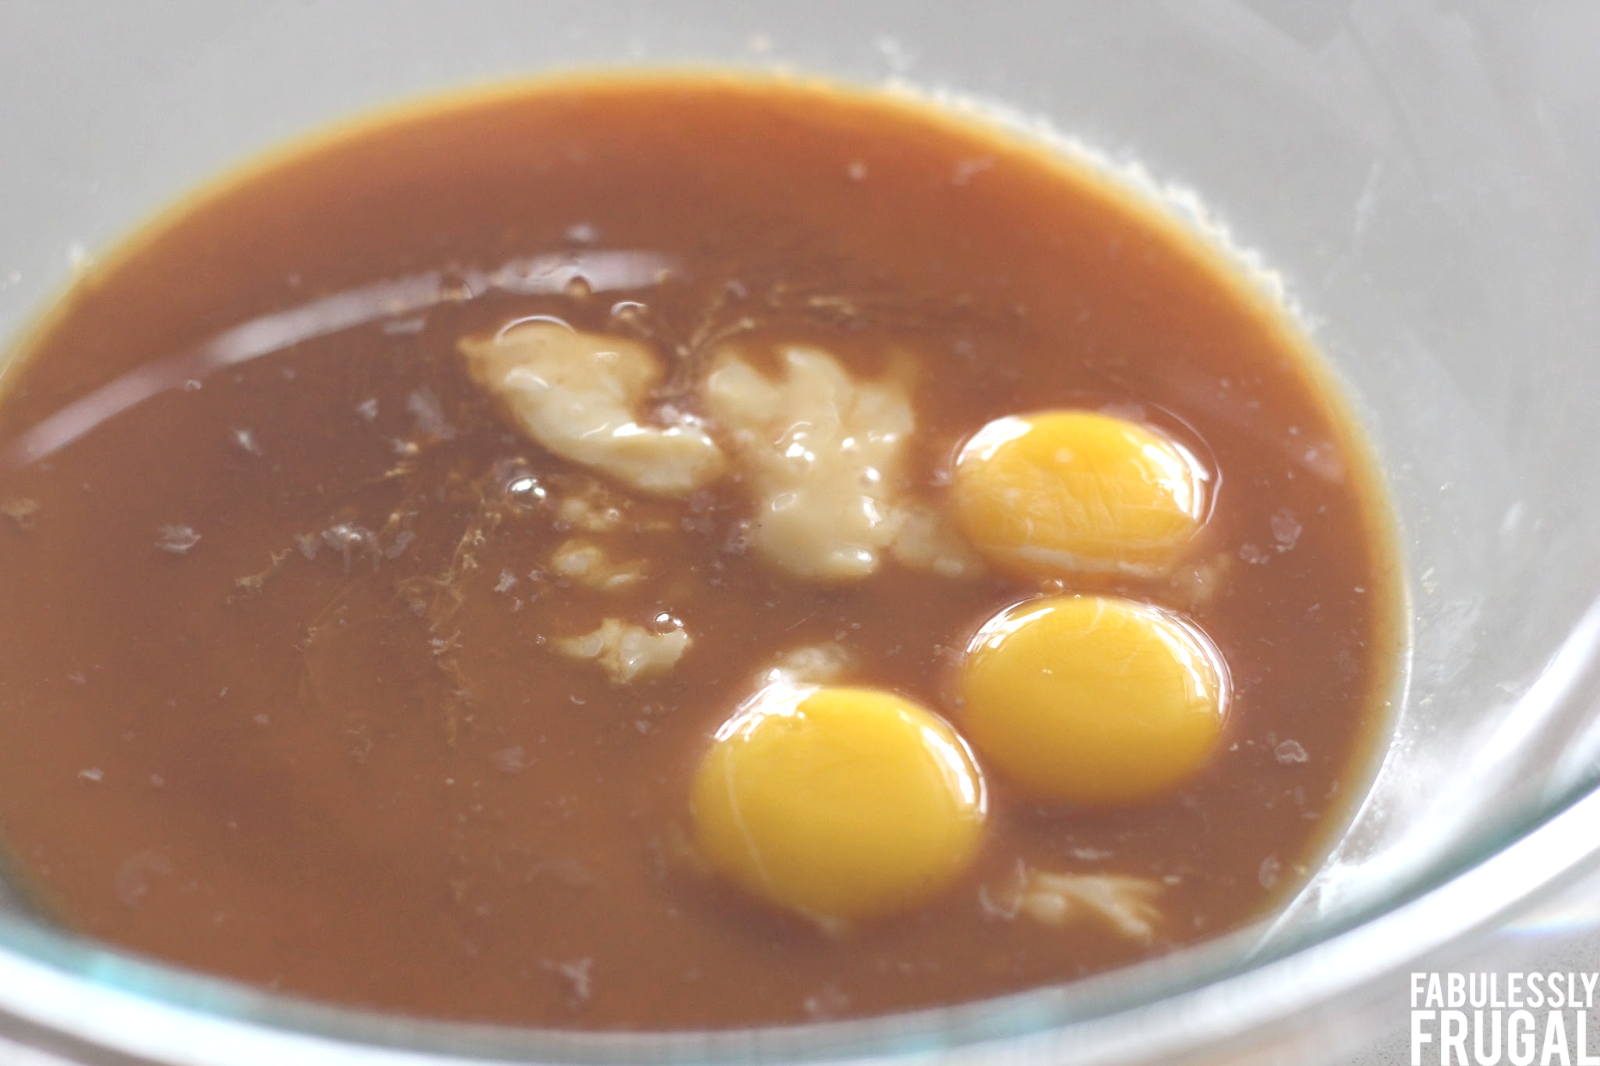 Egg yolks and other ingredients in mixing bowl